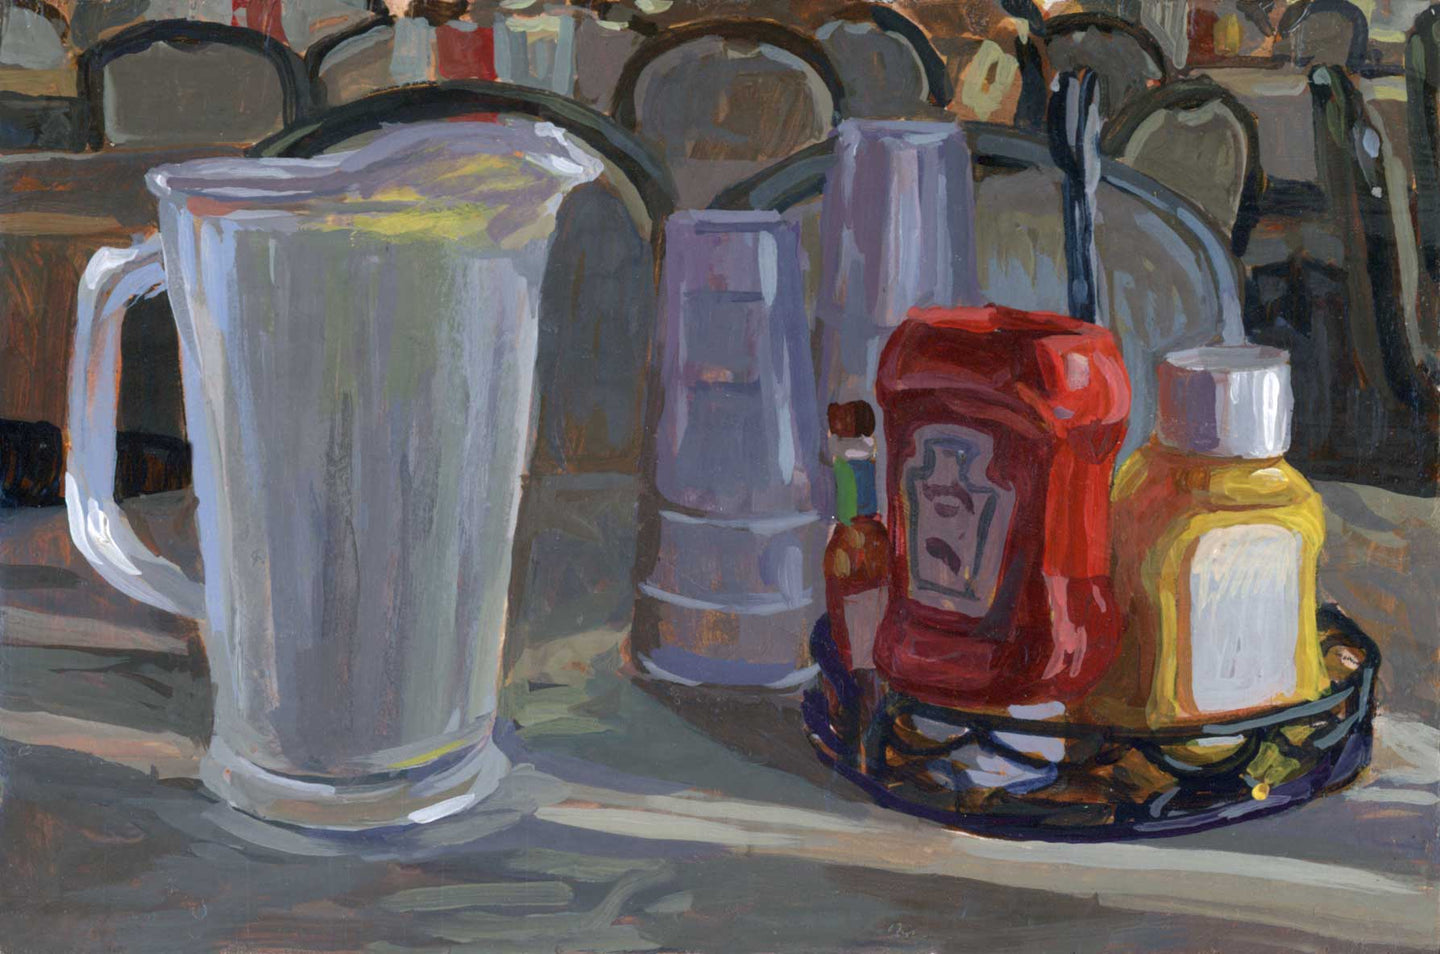 80. Diner Hall Condiments & Water Pitcher